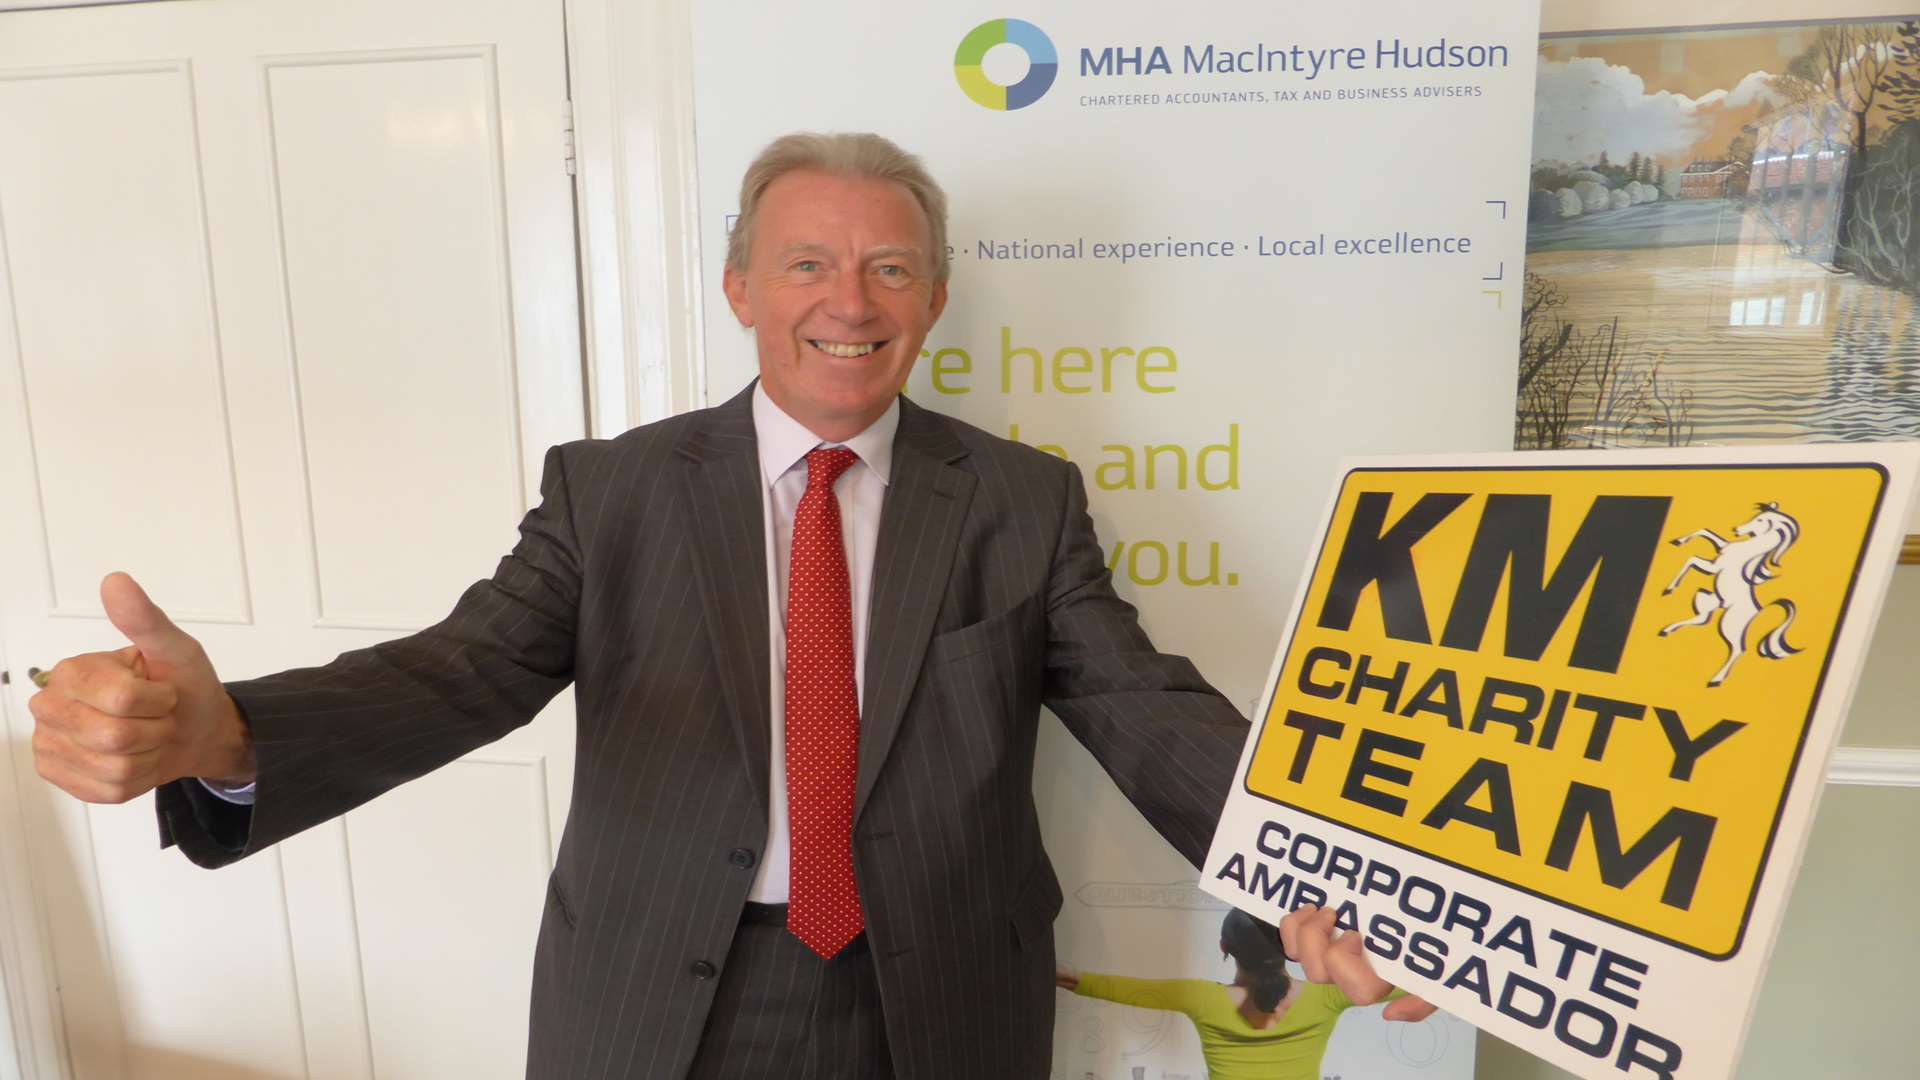 Colin Mills, Partner at MHA MacIntyre Hudson, will be delivering a session on tips and guidance on charity accounts at the KM Charity Team Forum. The event which is free for charities, schools and PTAs is on Wednesday, October 7.